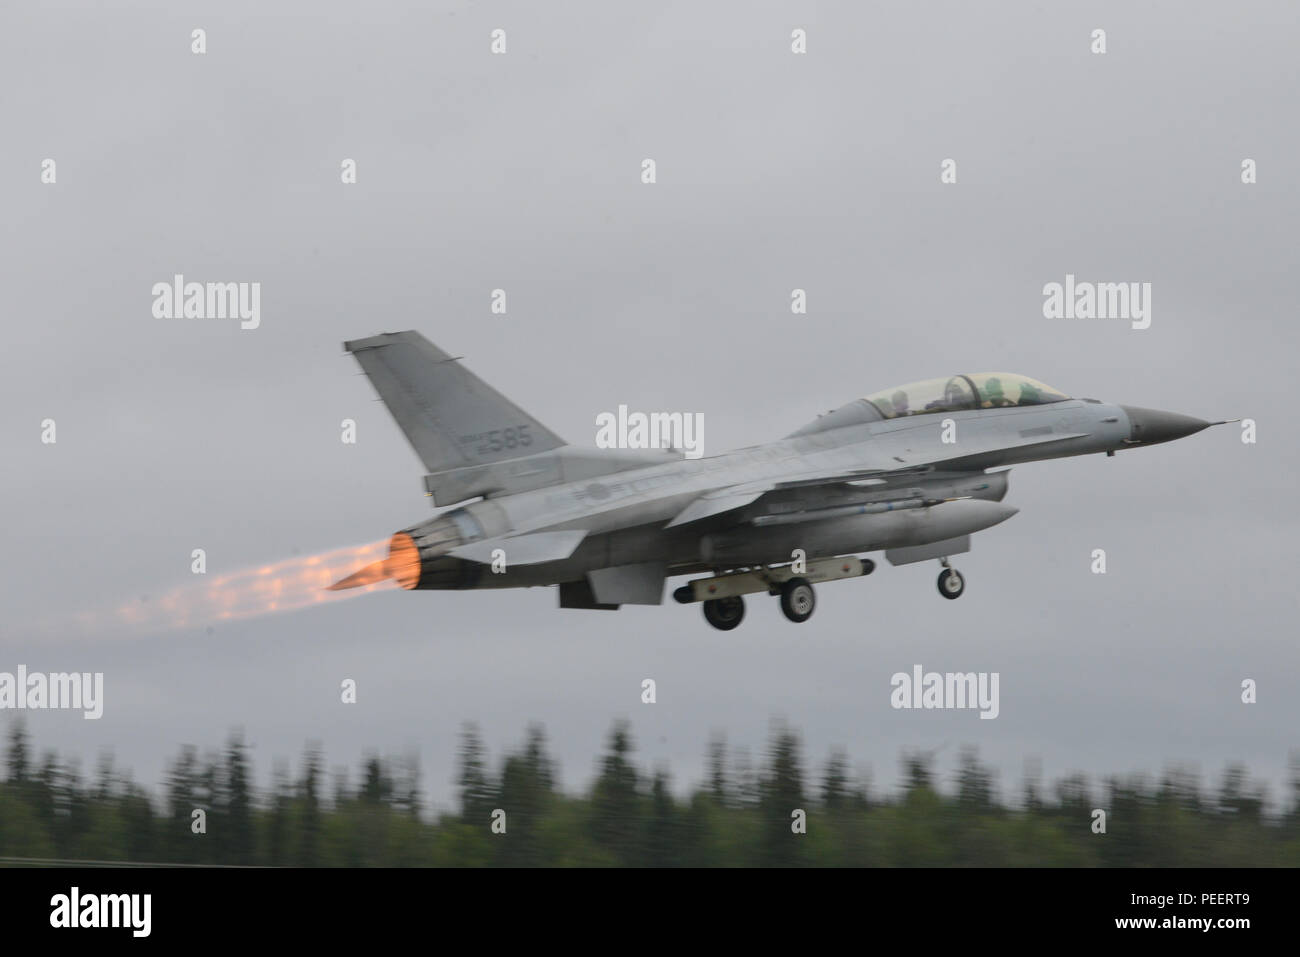 A Republic of Korea air force F-16 Fighting Falcon takes off from Eielson Air Force Base, Alaska, Aug. 10, 2015, during Red Flag-Alaska (RF-A) 15-3. RF-A is a series of Pacific Air Forces commander-directed field training exercises for U.S. and partner nation forces, providing combined offensive counter-air, interdiction, close air support and large force employment training in a simulated combat environment. (U.S. Air Force photo by Senior Airman Ashley Nicole Taylor/Released) Stock Photo